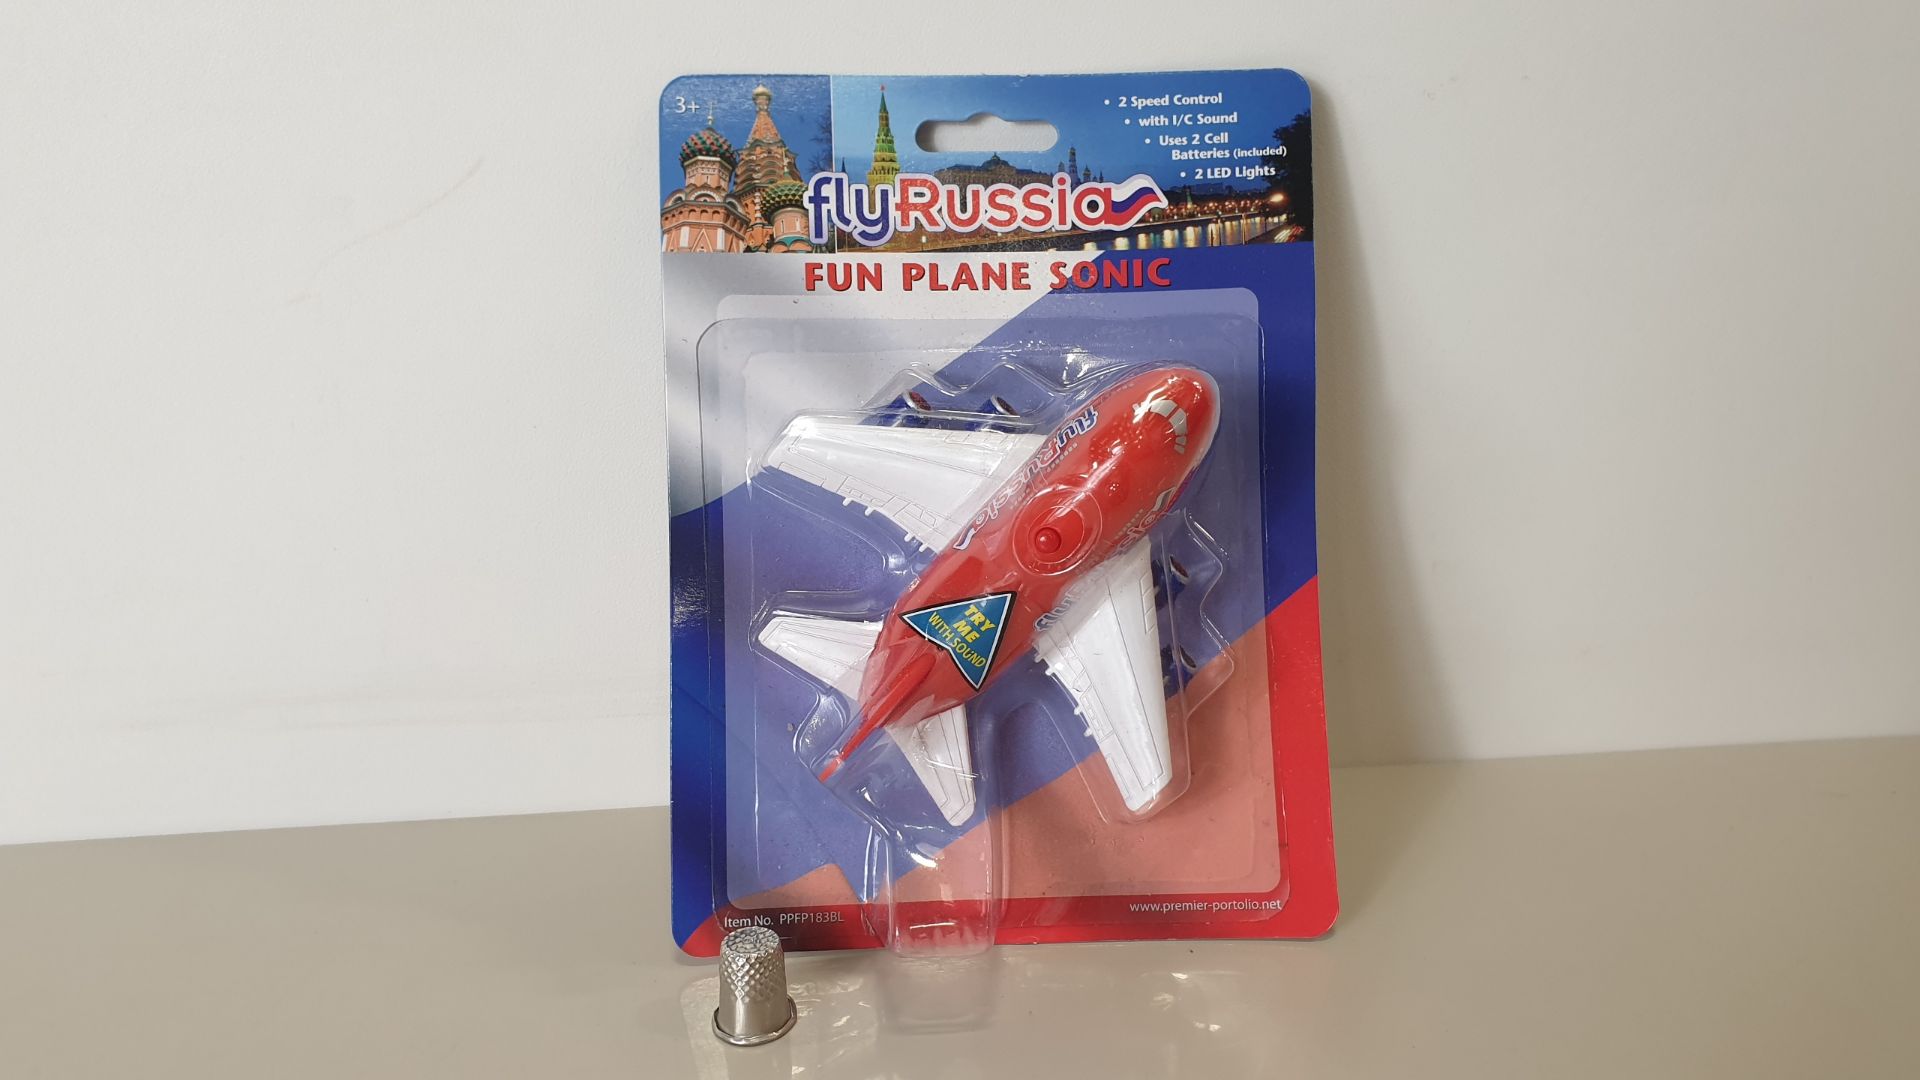 96 X SONIC FUN PLANE WITH LIGHTS & SOUND - FLYRUSSIA - BATTERIES INCLUDED - (PPFP183BL) - ORIG